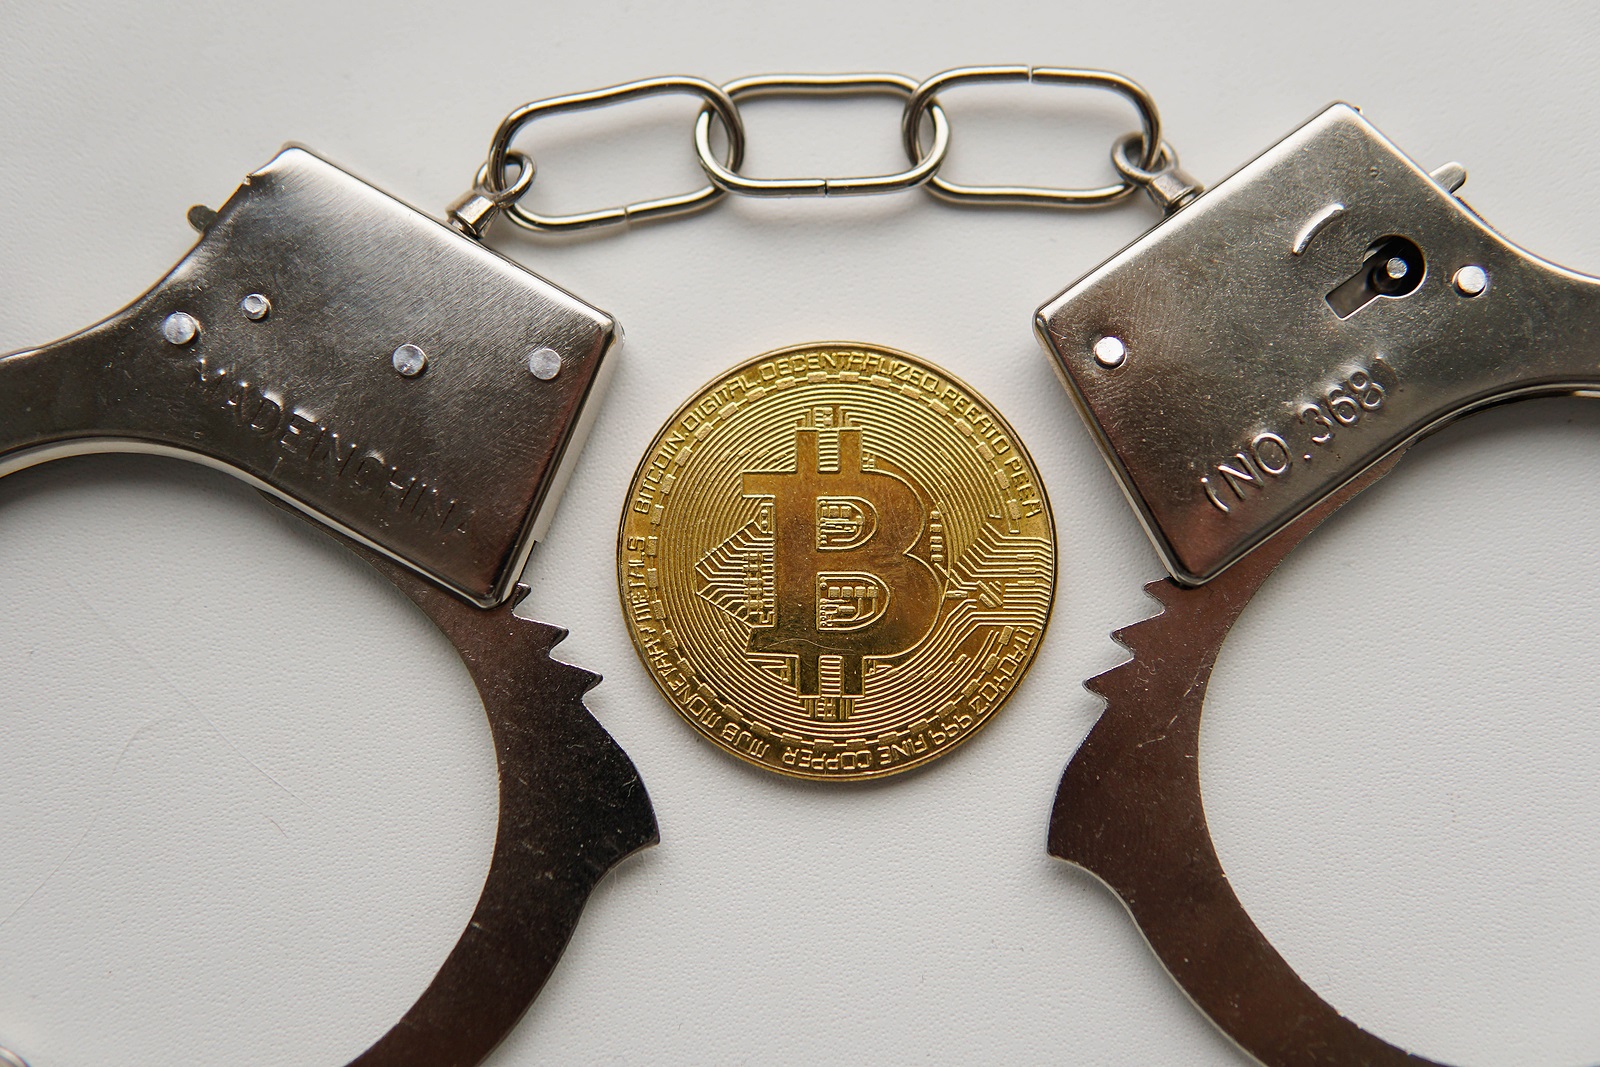 Investment Banker Guilty of Cryptocurrency Fraud Scheme